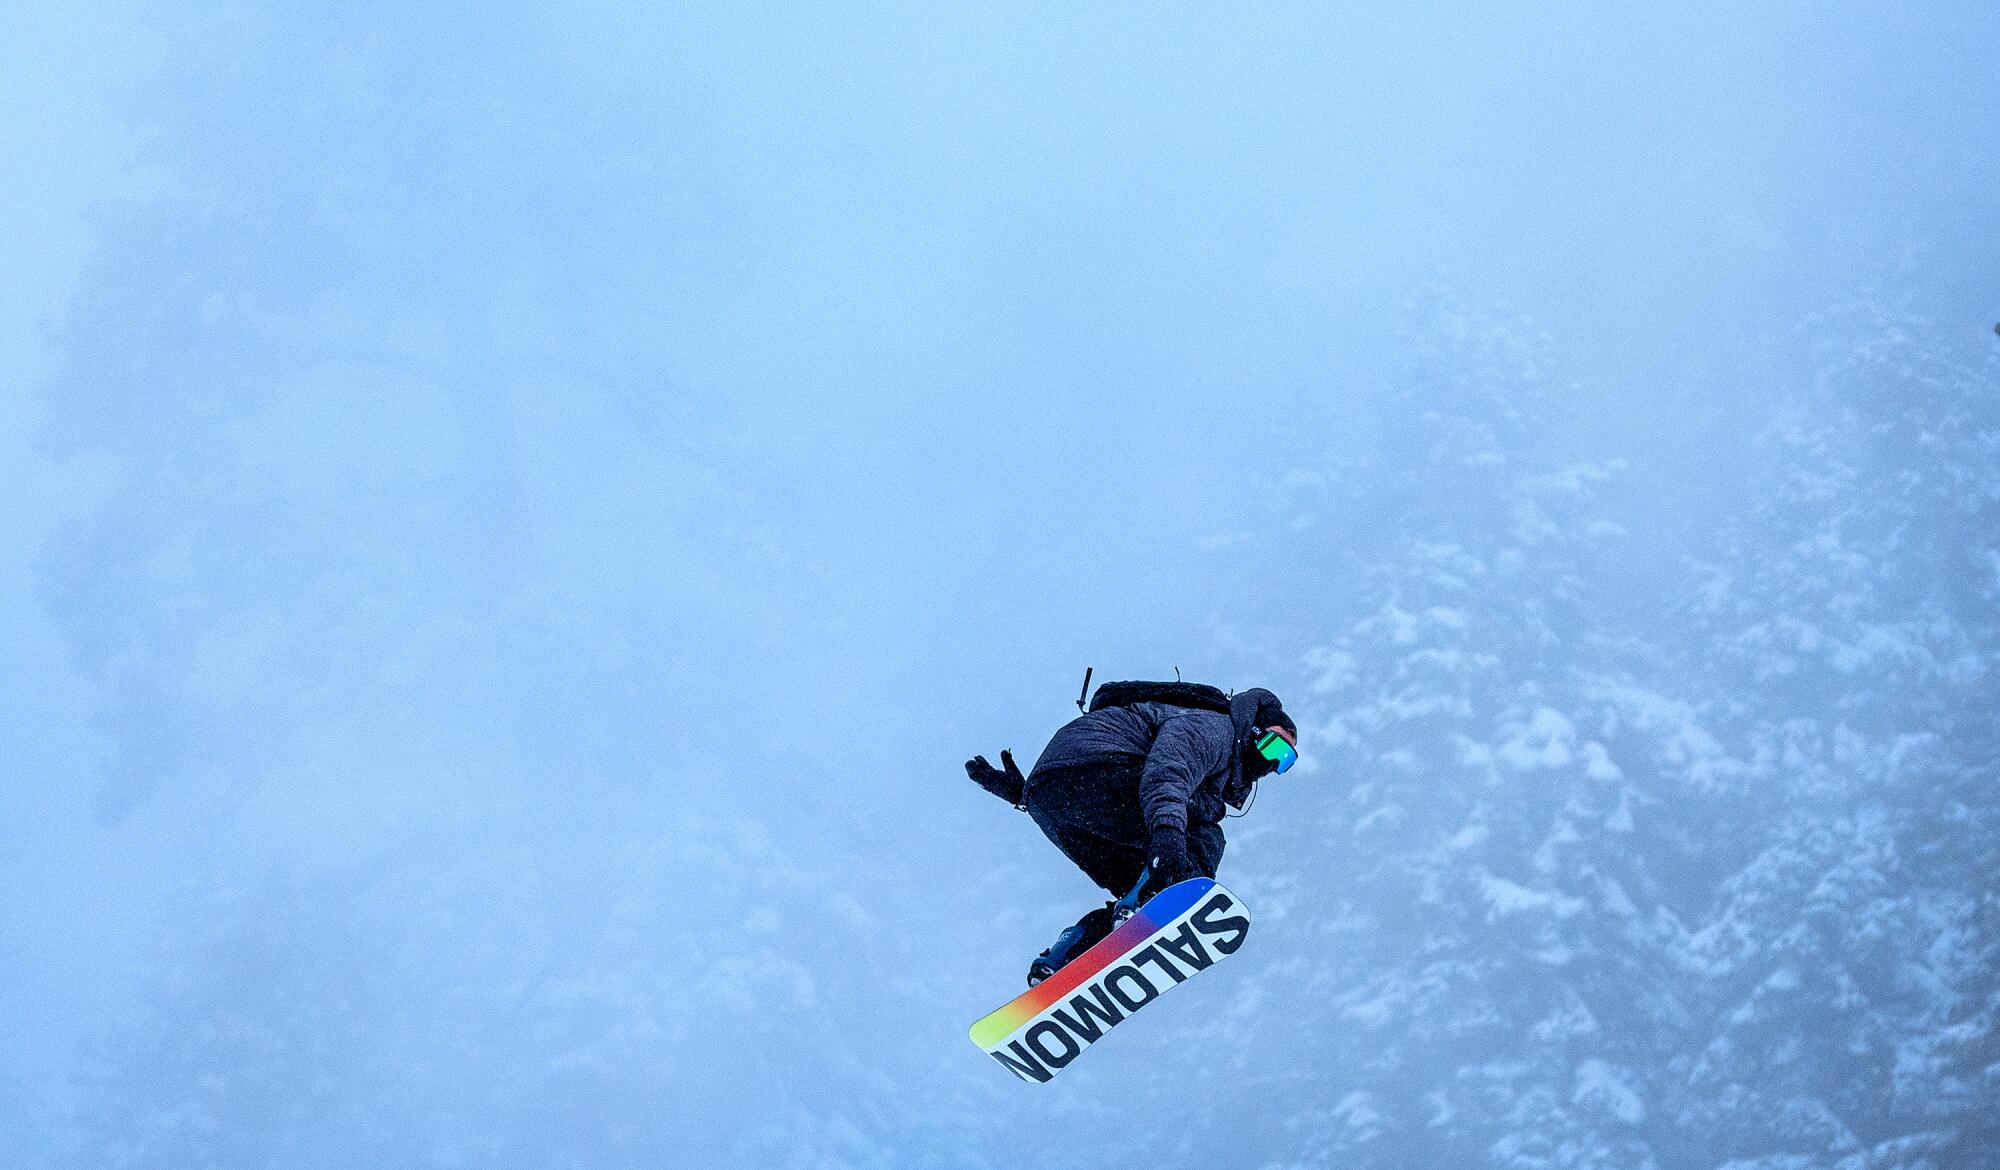 A snowboarder takes to the air.